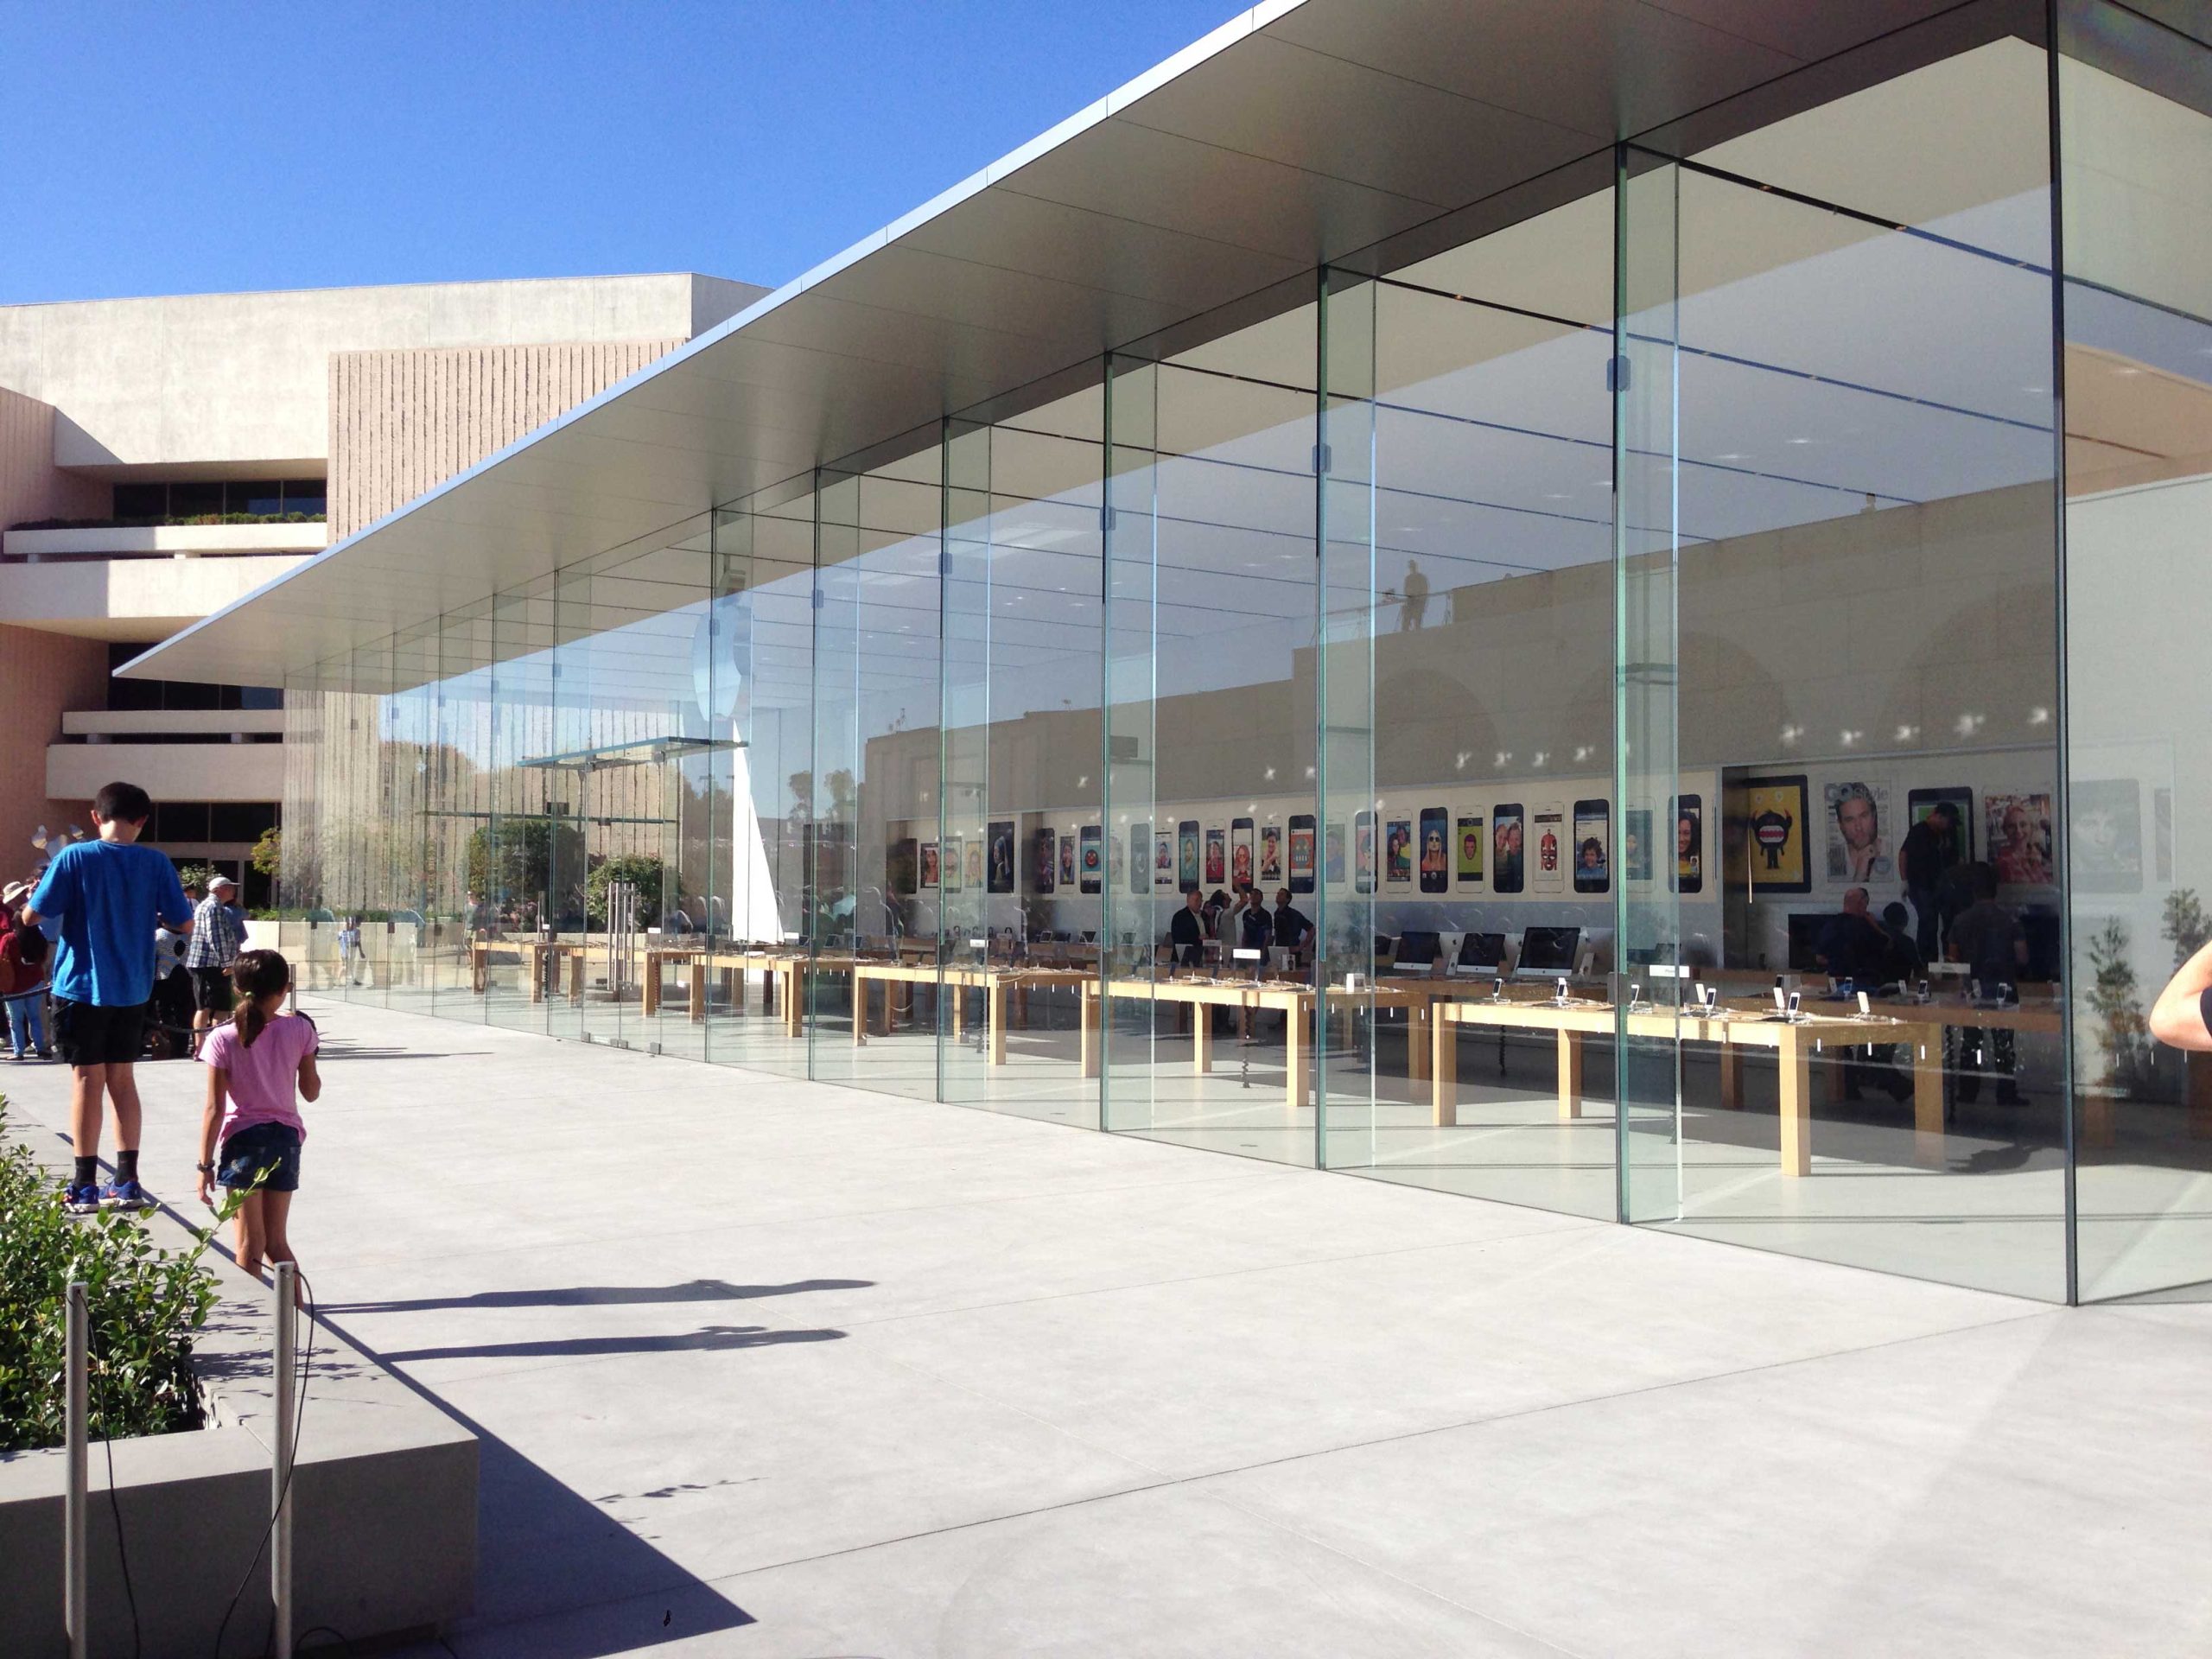 Apple Store, Stanford